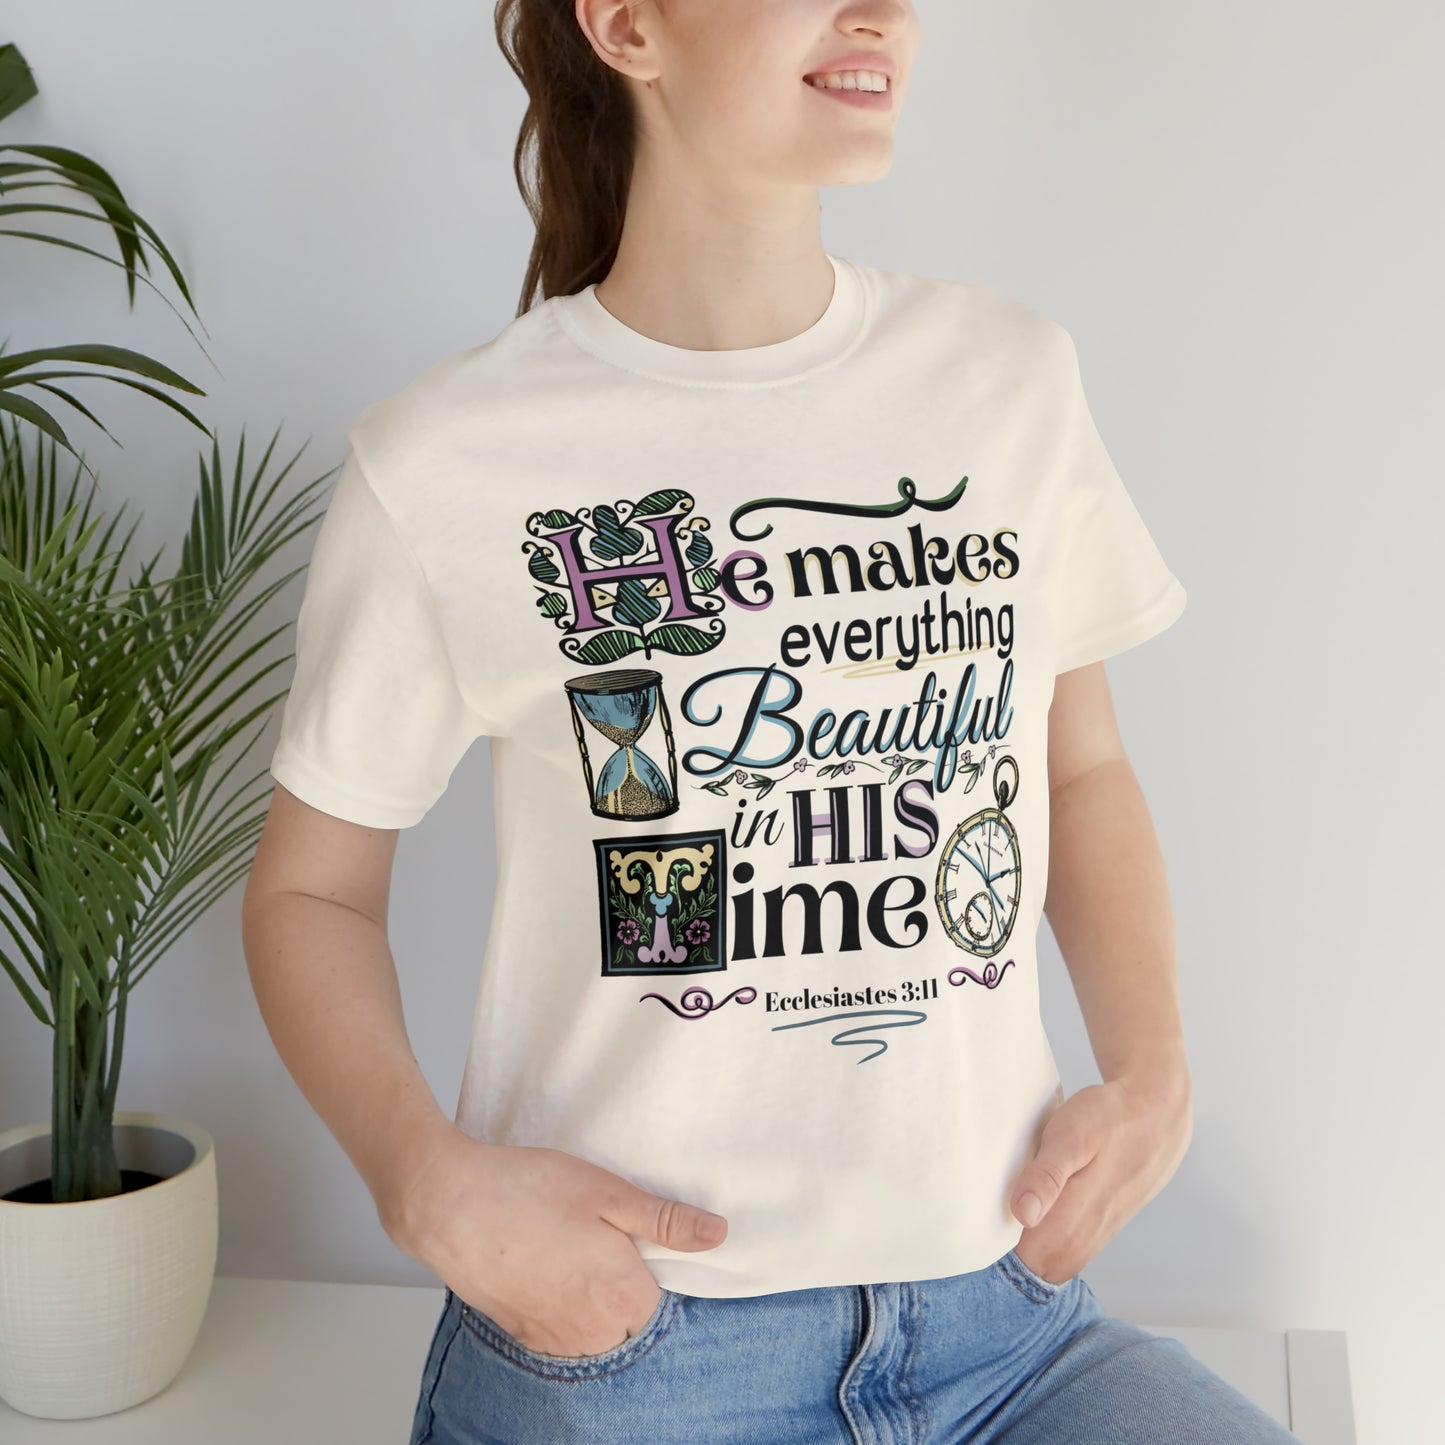 Beautiful in His Time (Green Pastures Apparel)